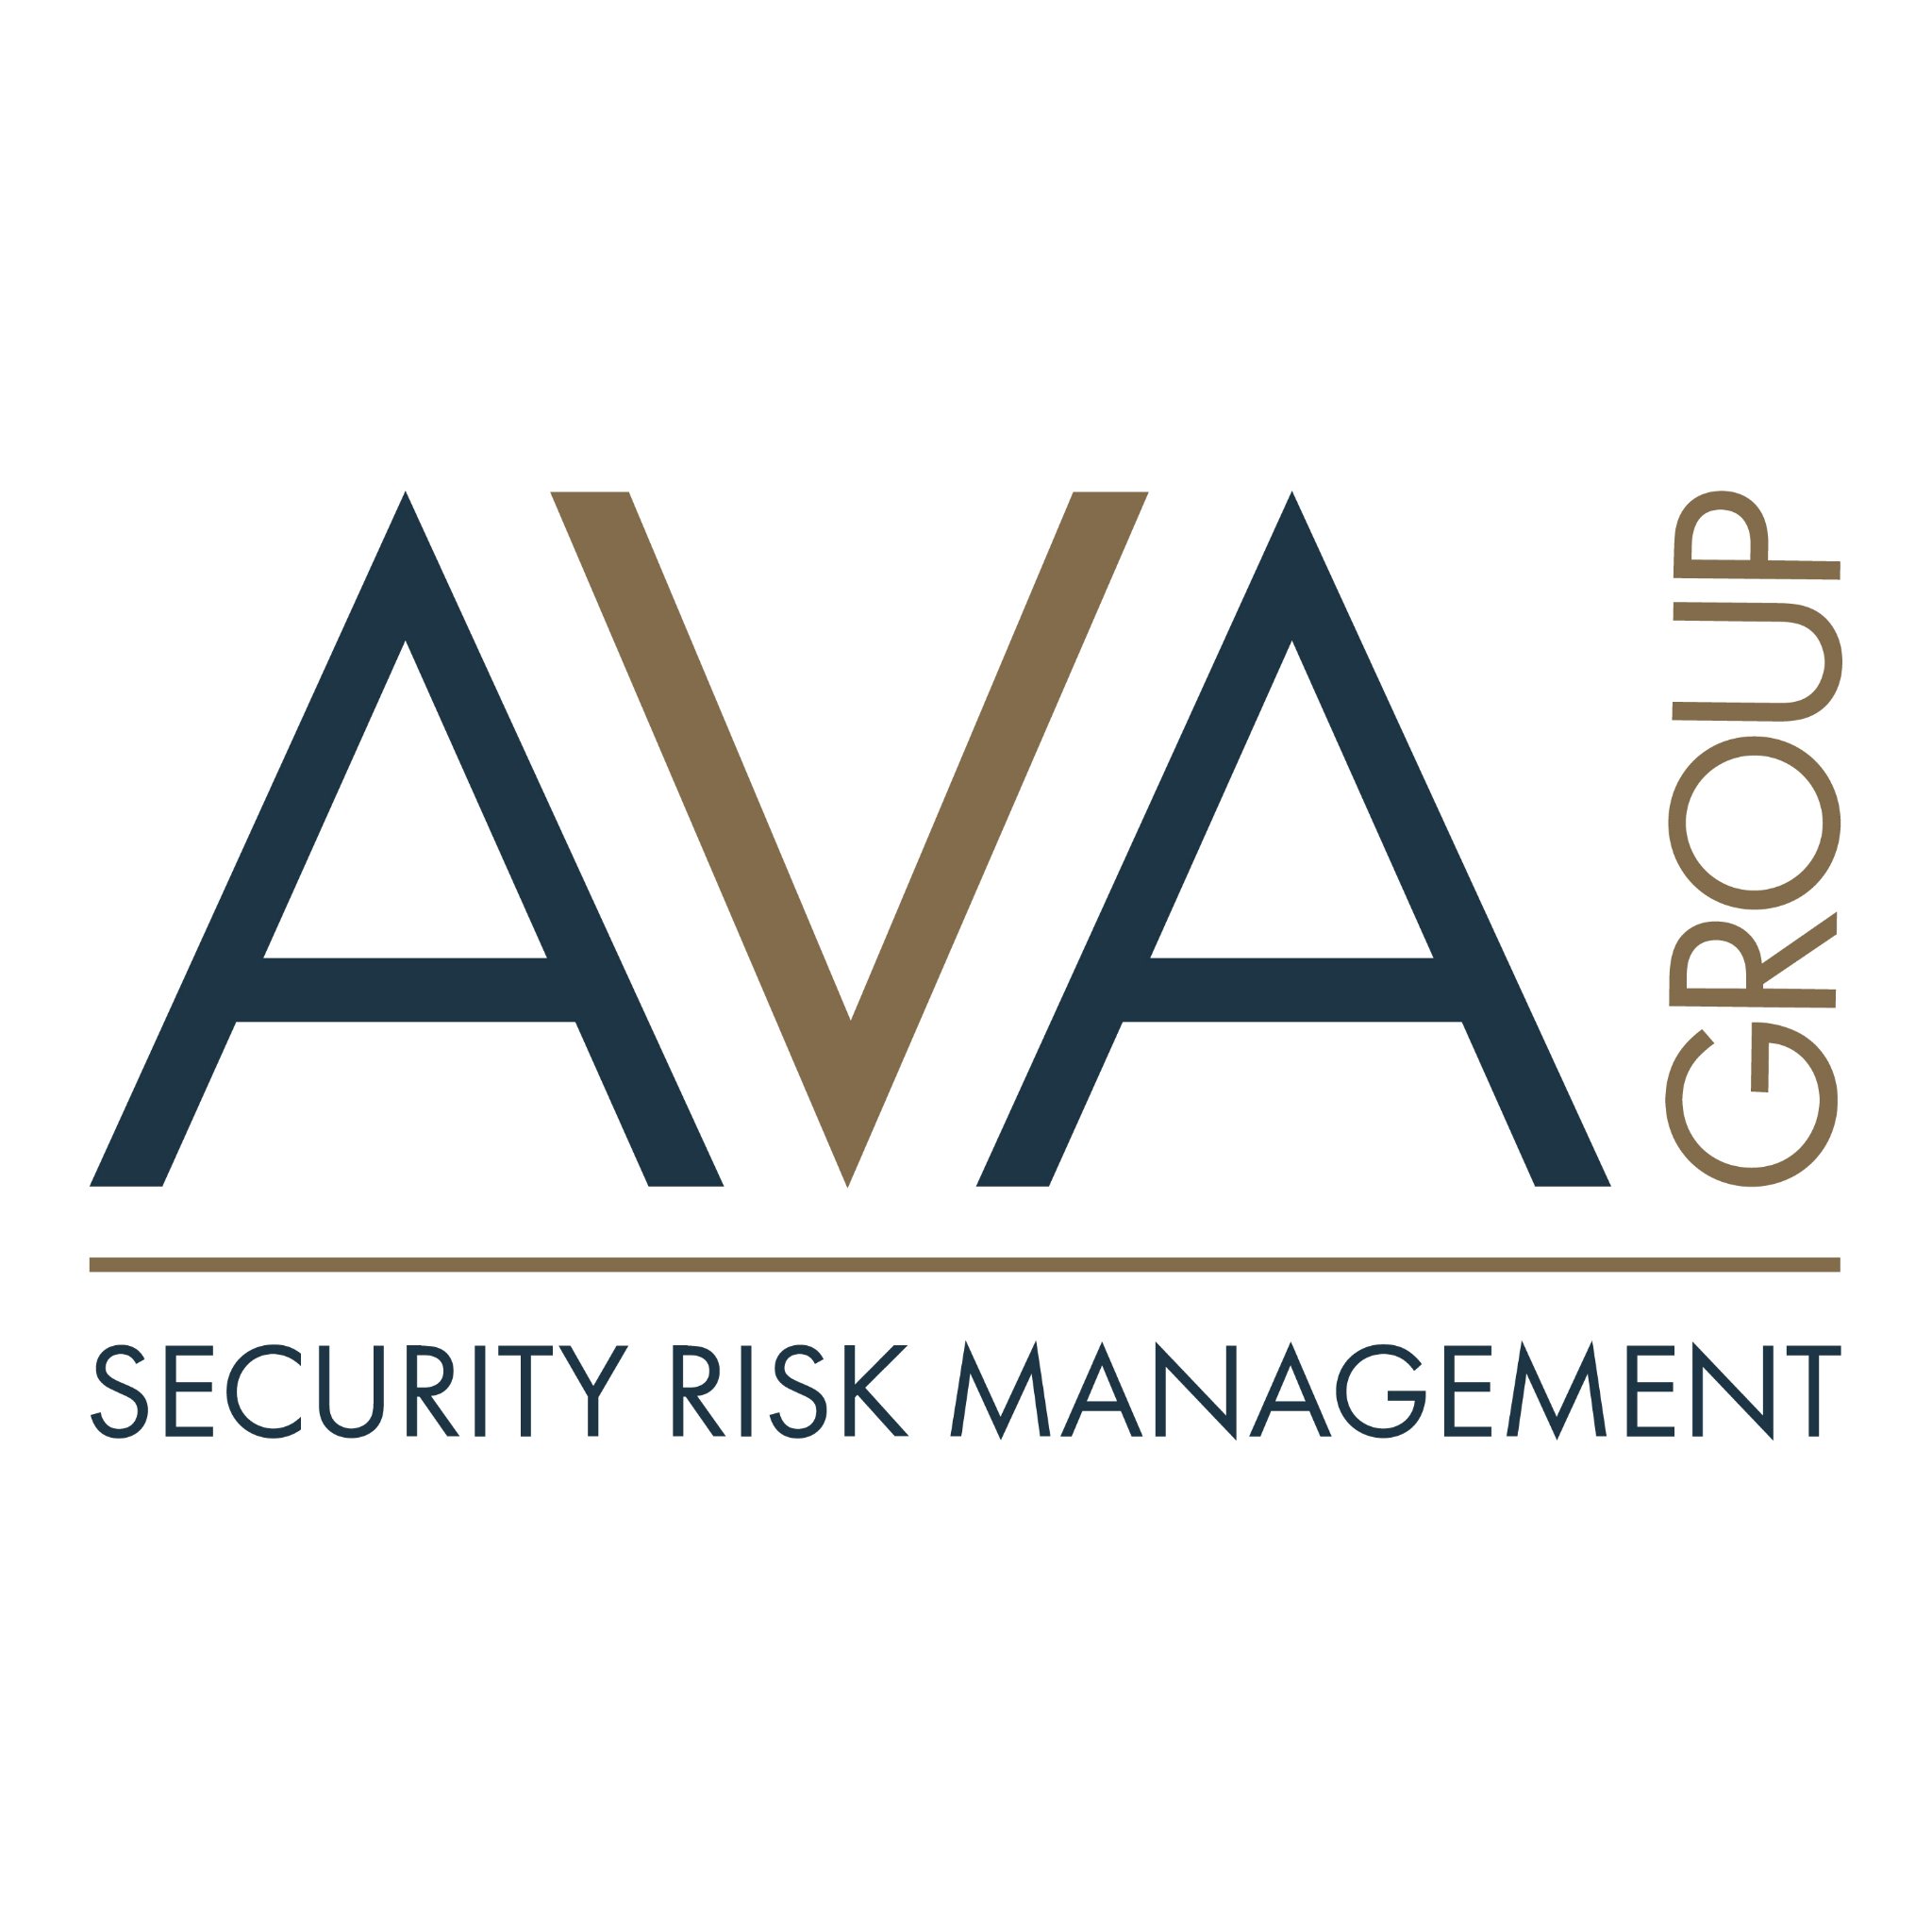 Ava Global is a market leader of risk management services and technologies, trusted by some of the most security conscious clients in the world.